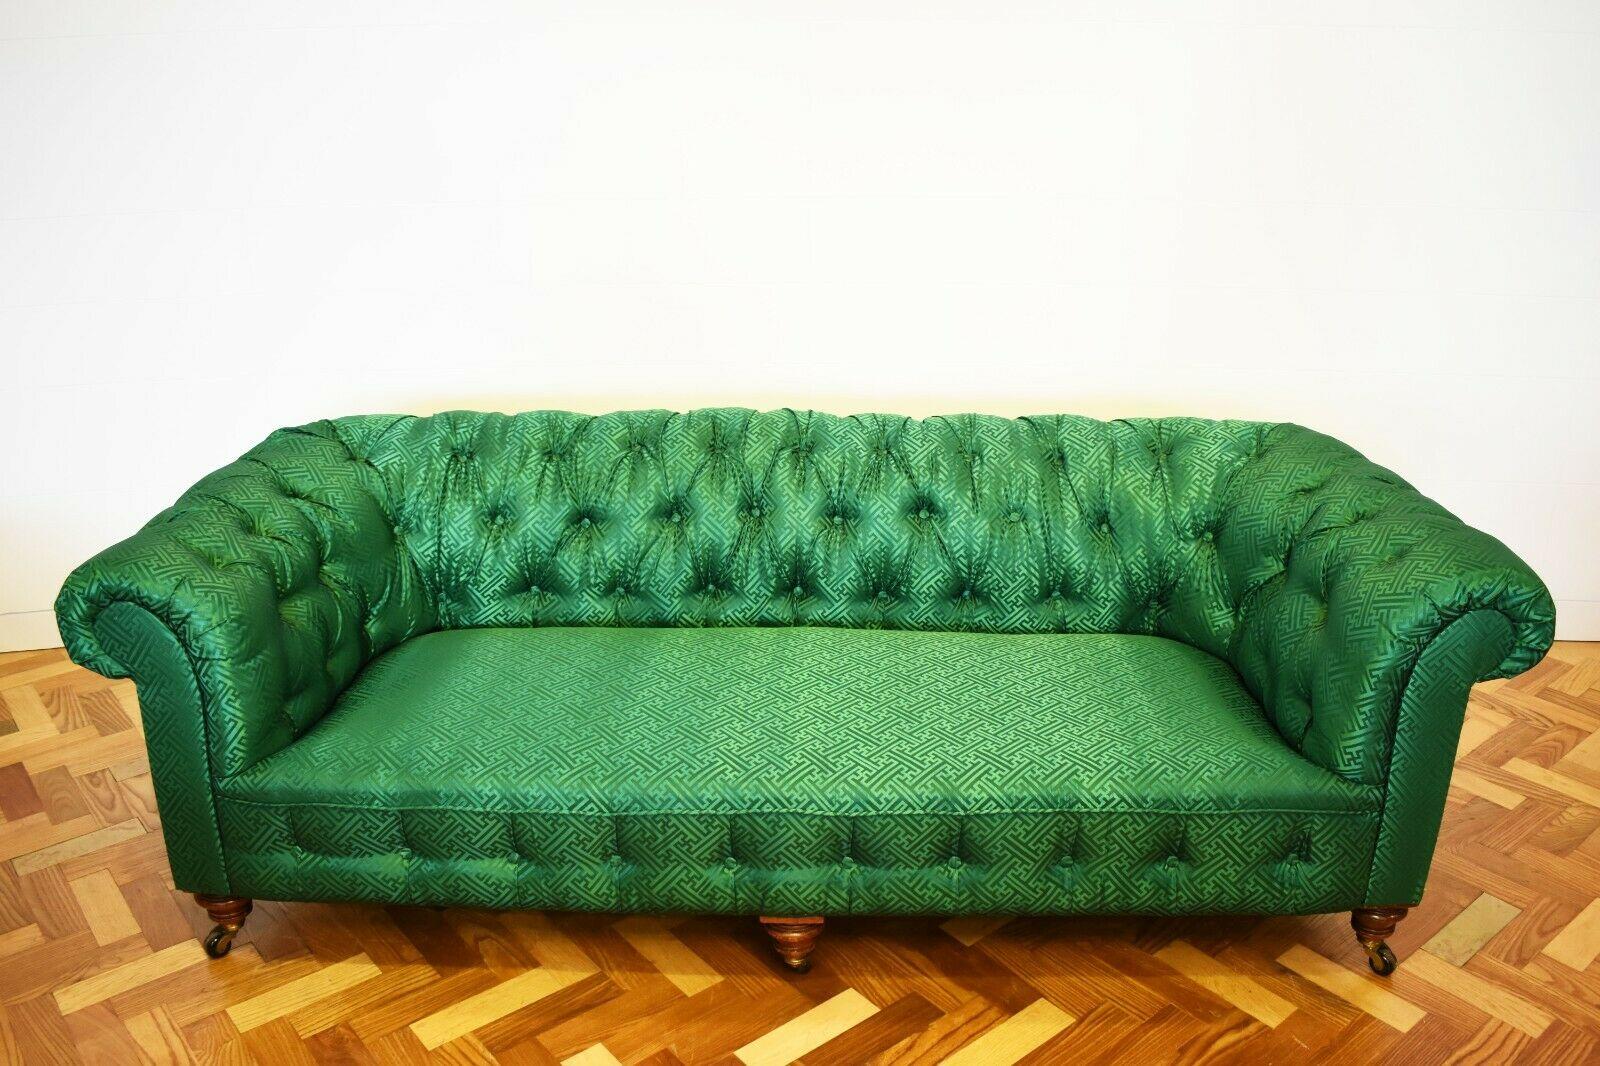 European Victorian Button Back Chesterfield with Mahogony Legs, Upholstered in Green Silk